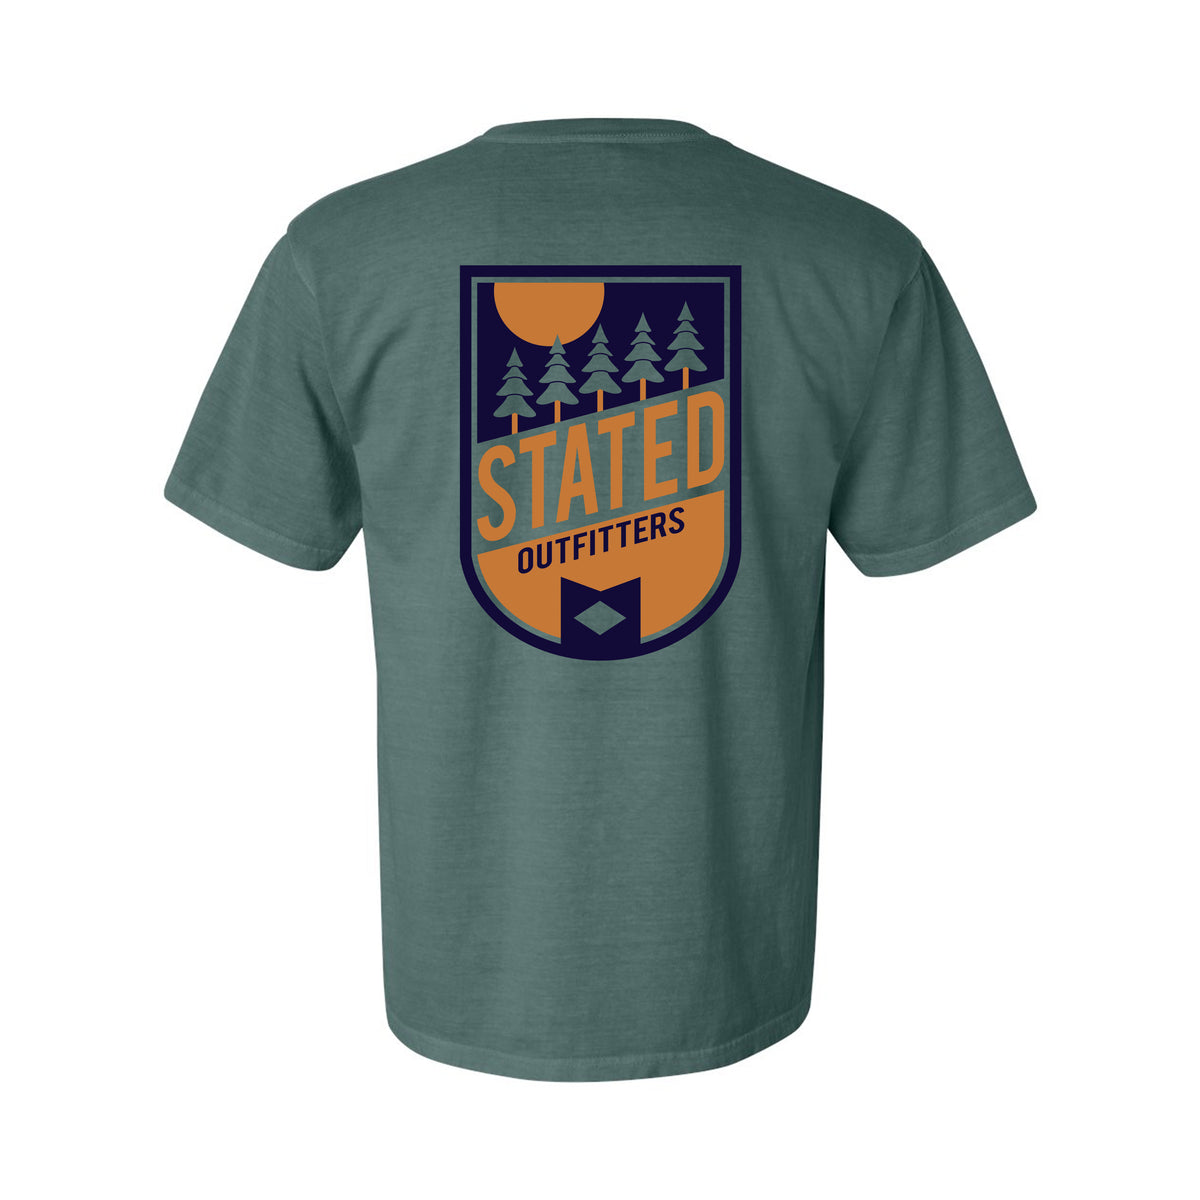 Stated Outfitters Sunset Hill Badge T-Shirt